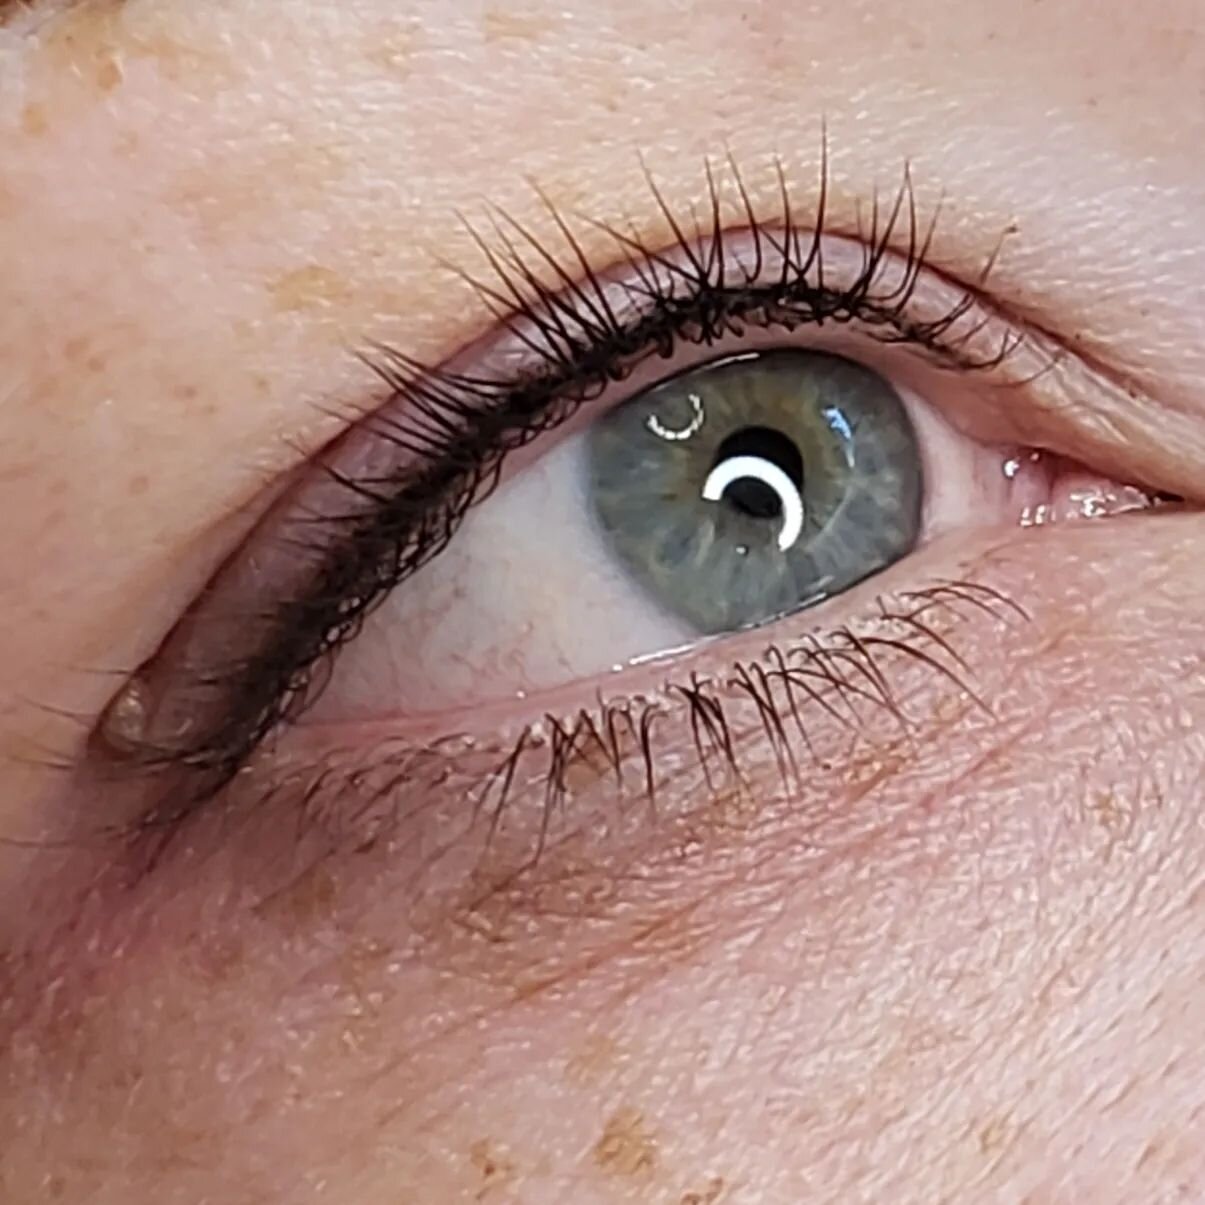 Lash enhancement is such a great service because it's subtle but instantly makes eyes of all shapes look prettier!
This is a baby liner applied between the lashes on the top lid only. No winds or wedges for a no make up make up look. 

Interested? Bo